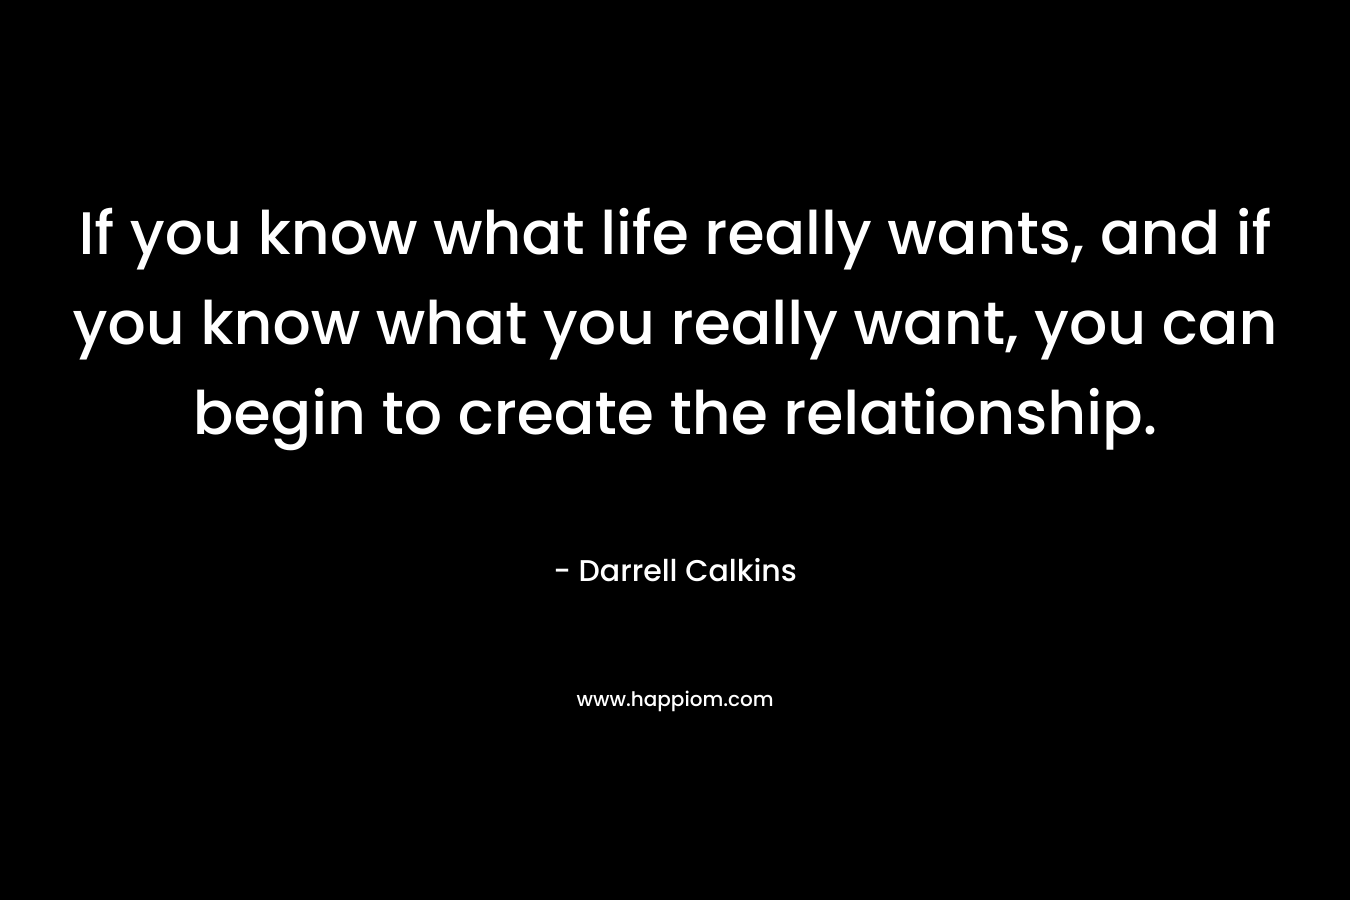 If you know what life really wants, and if you know what you really want, you can begin to create the relationship.